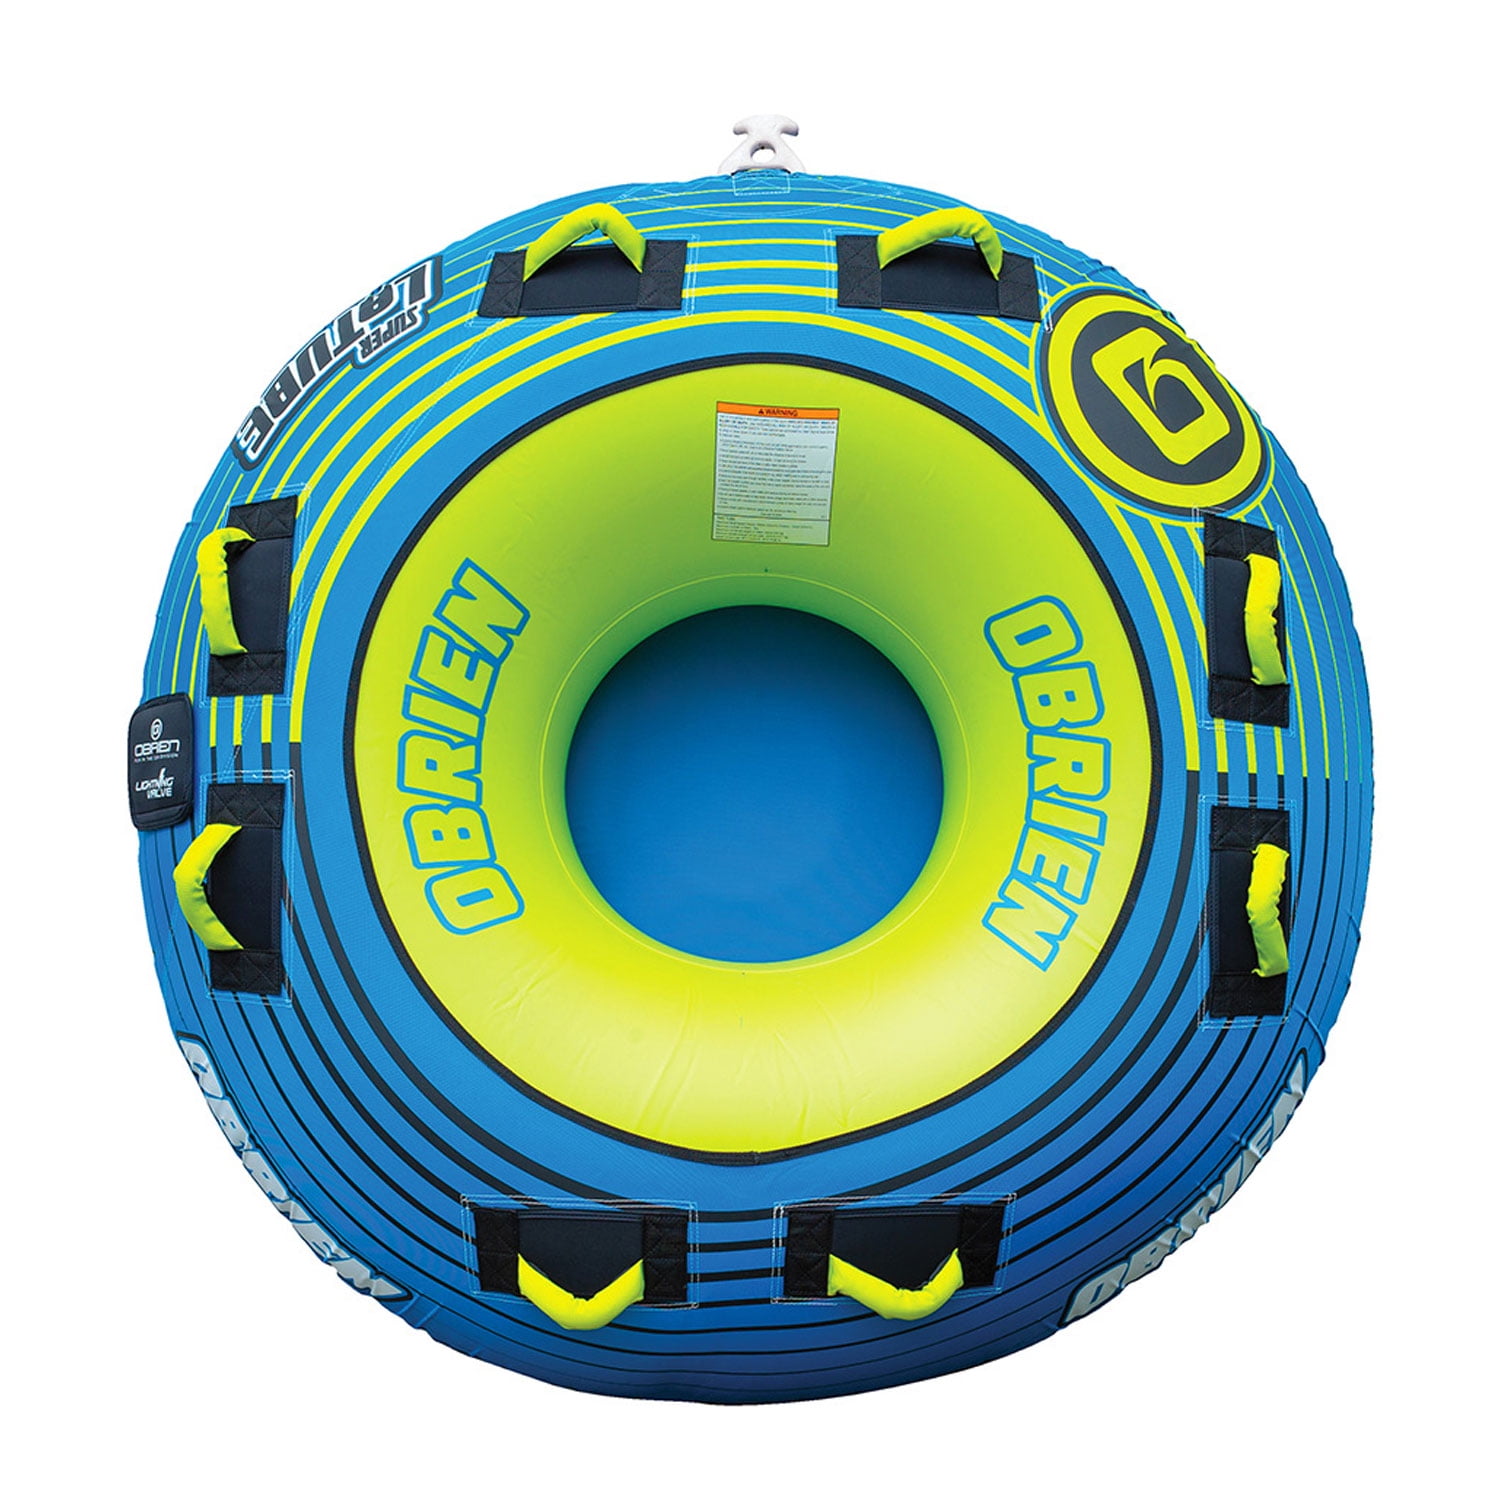 SereneLife SLTOWBL10 High-quality Watersports 2 Person Towable Tube Inflatable for sale online 